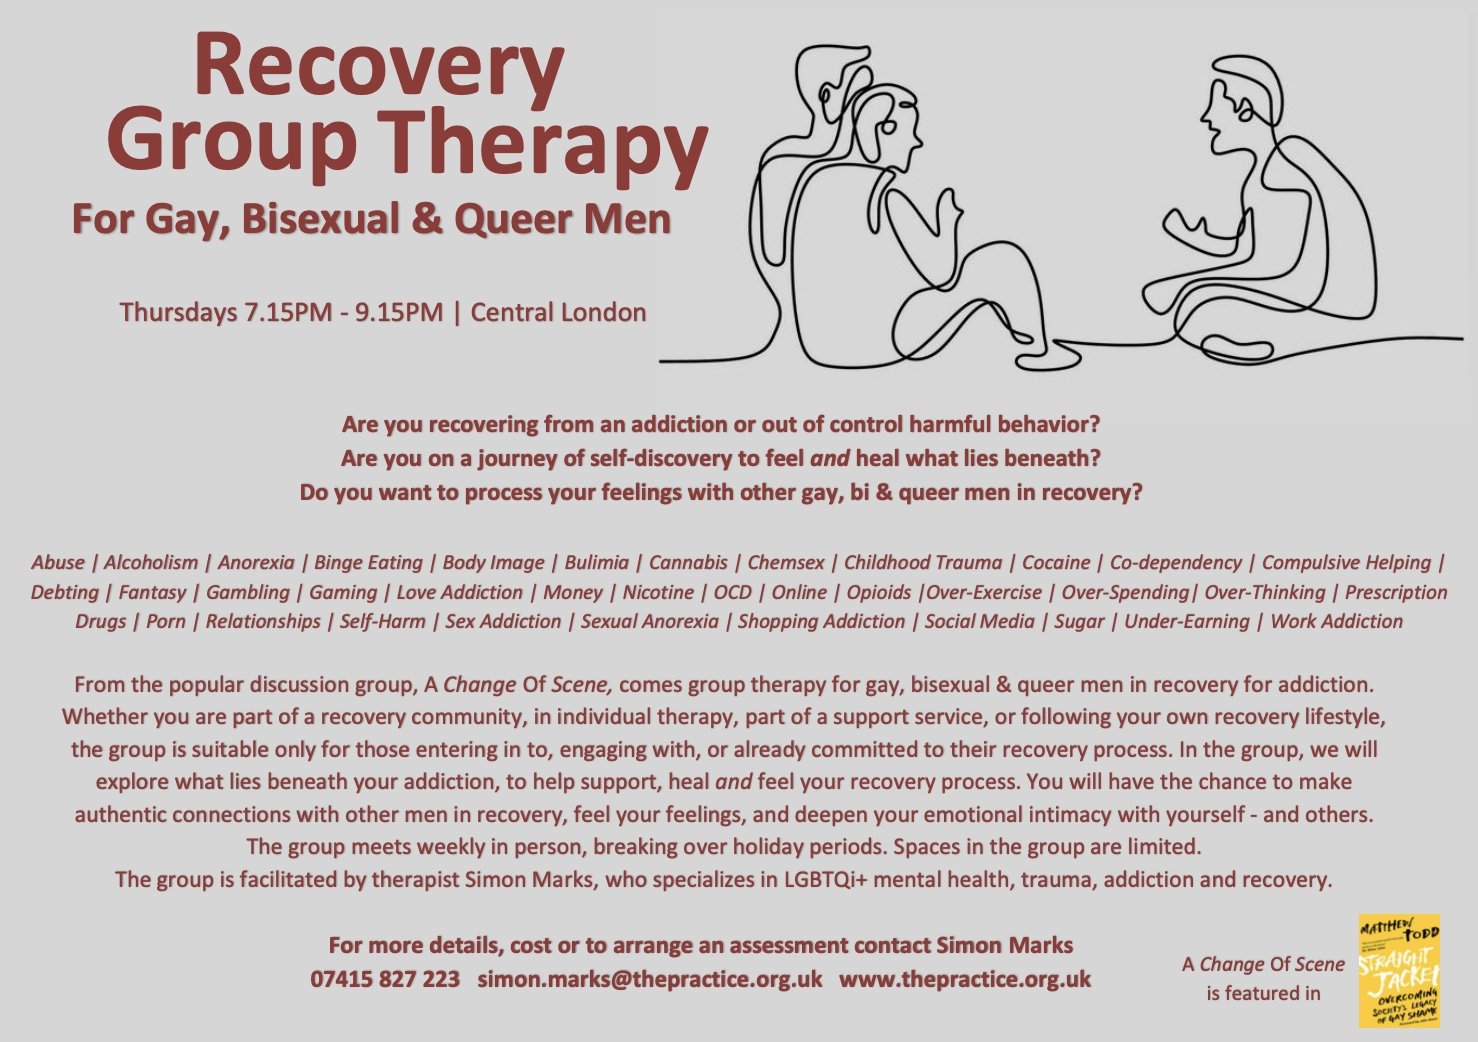 Recovery Group Therapy for Website.jpg